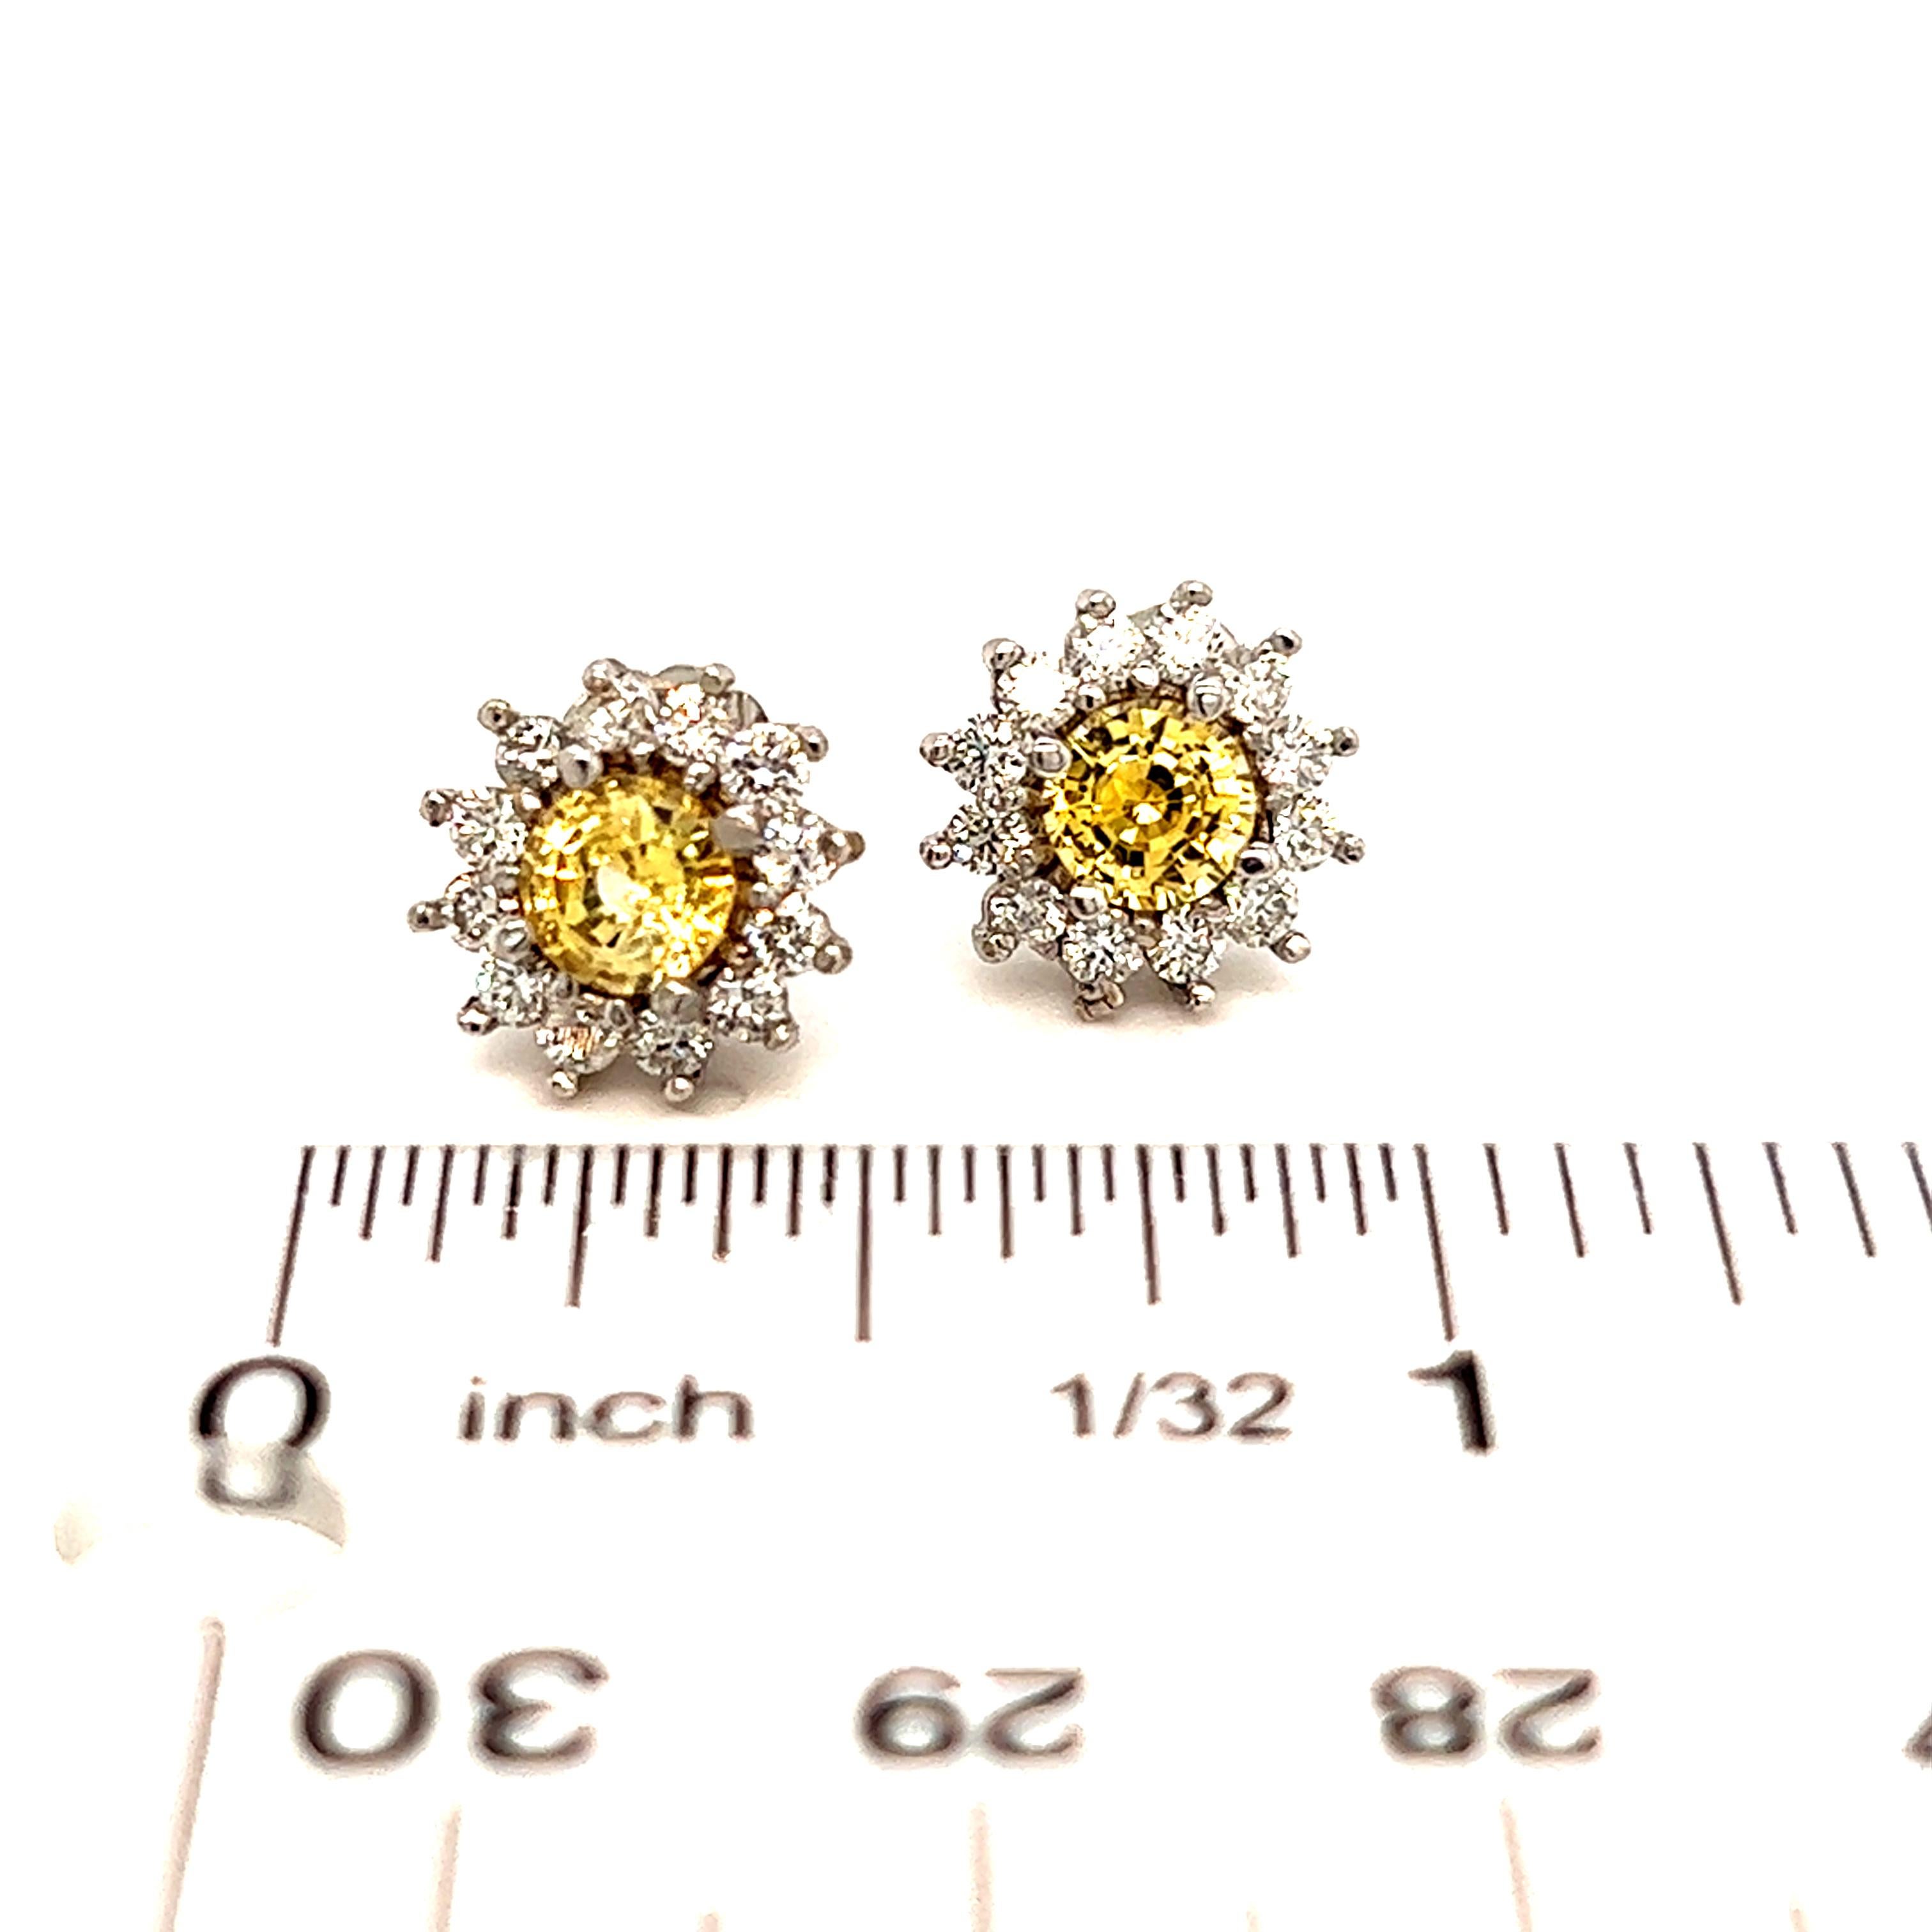 Natural Sapphire Diamond Stud Earrings 14K Gold 2.91 TCW Certified In New Condition For Sale In Brooklyn, NY